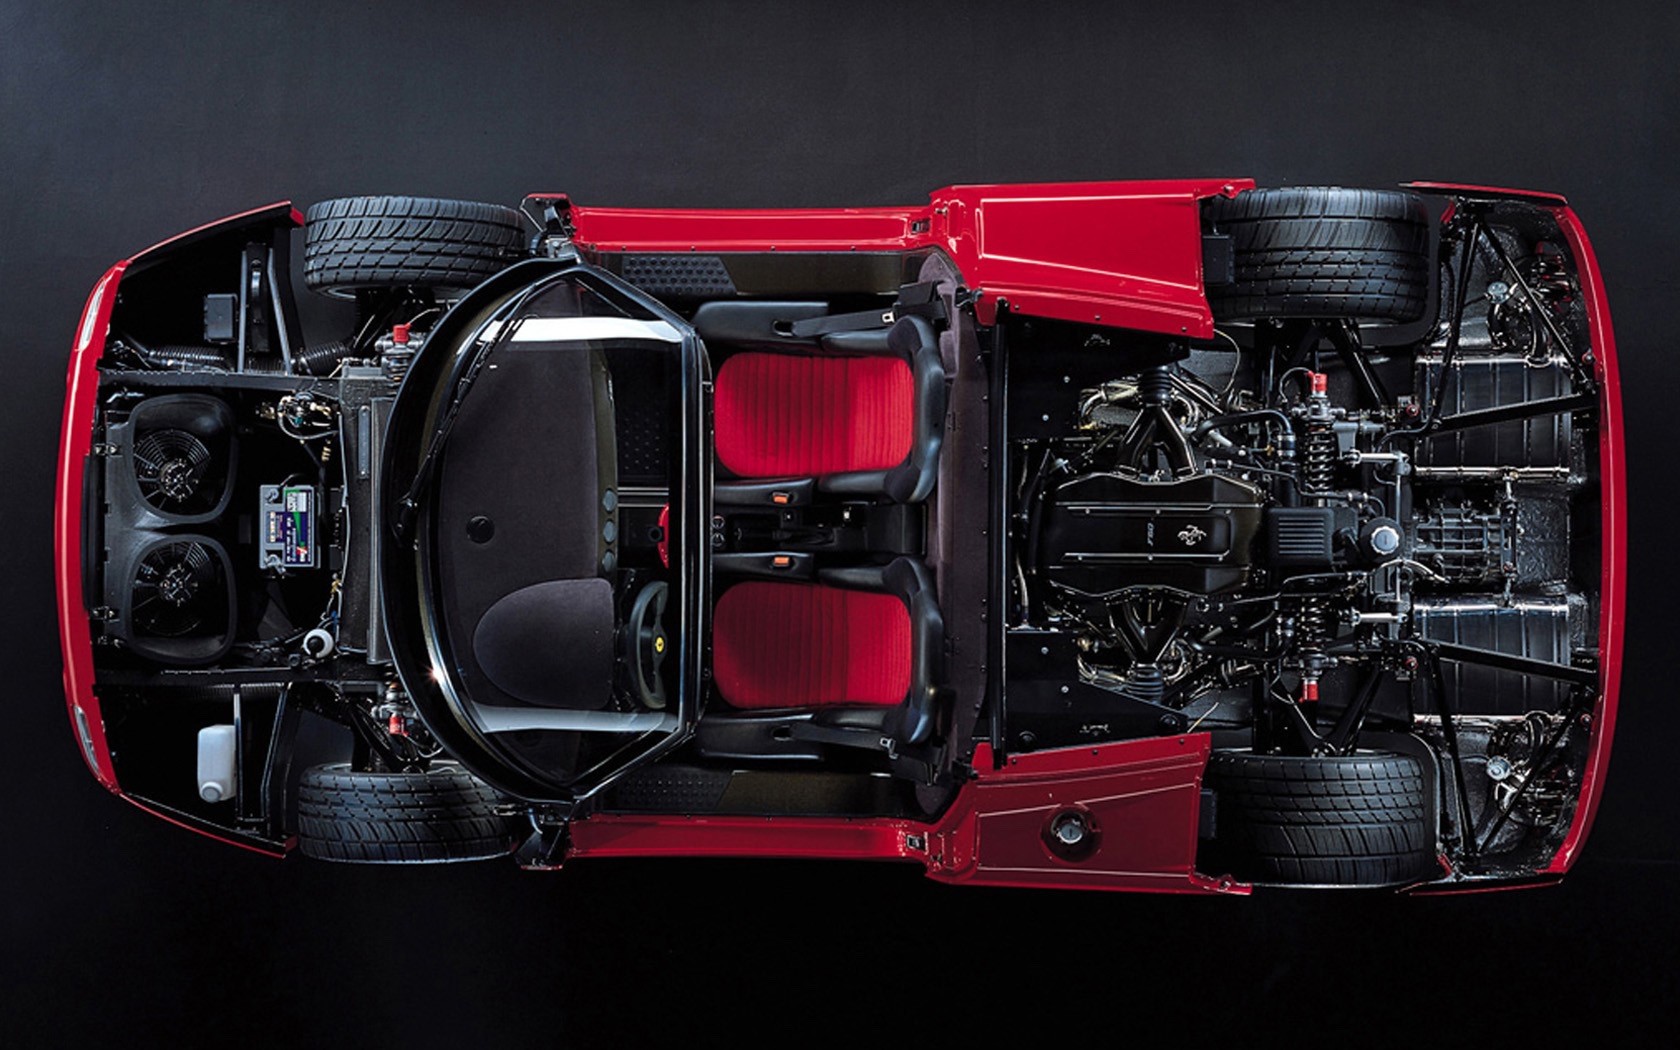 Overhead shot of Ferrari F50 with parts and systems exposed